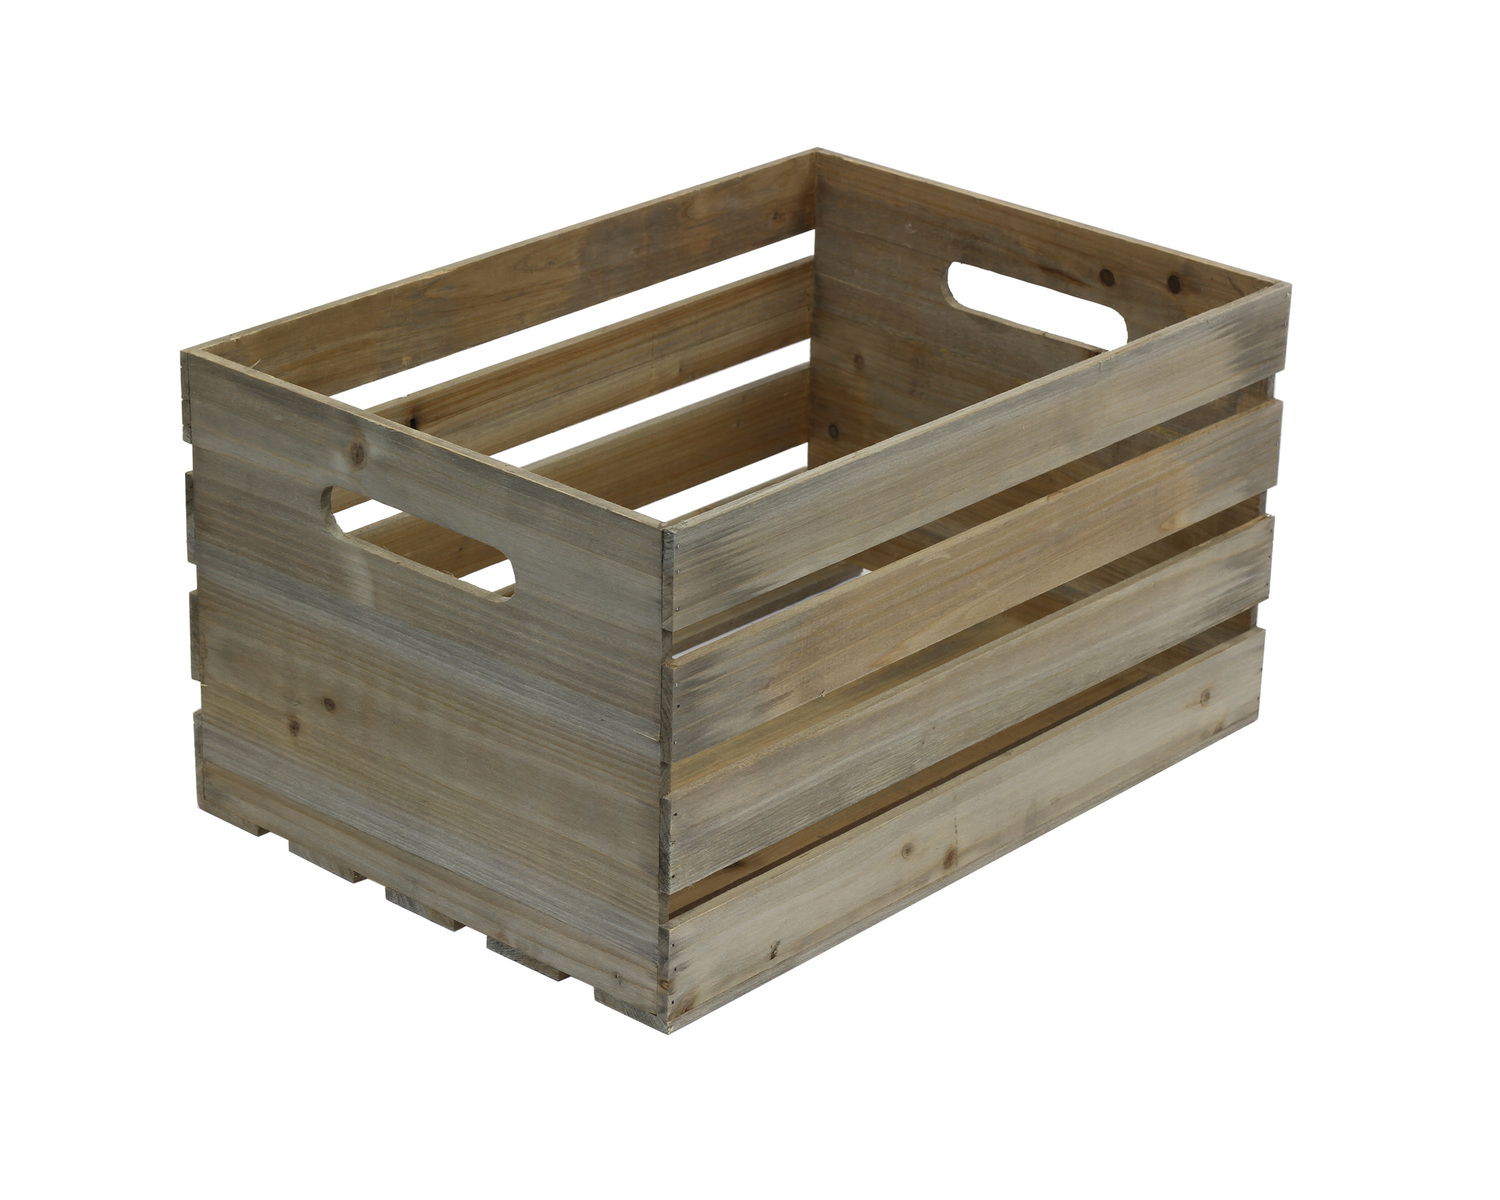 Crates and Pallet